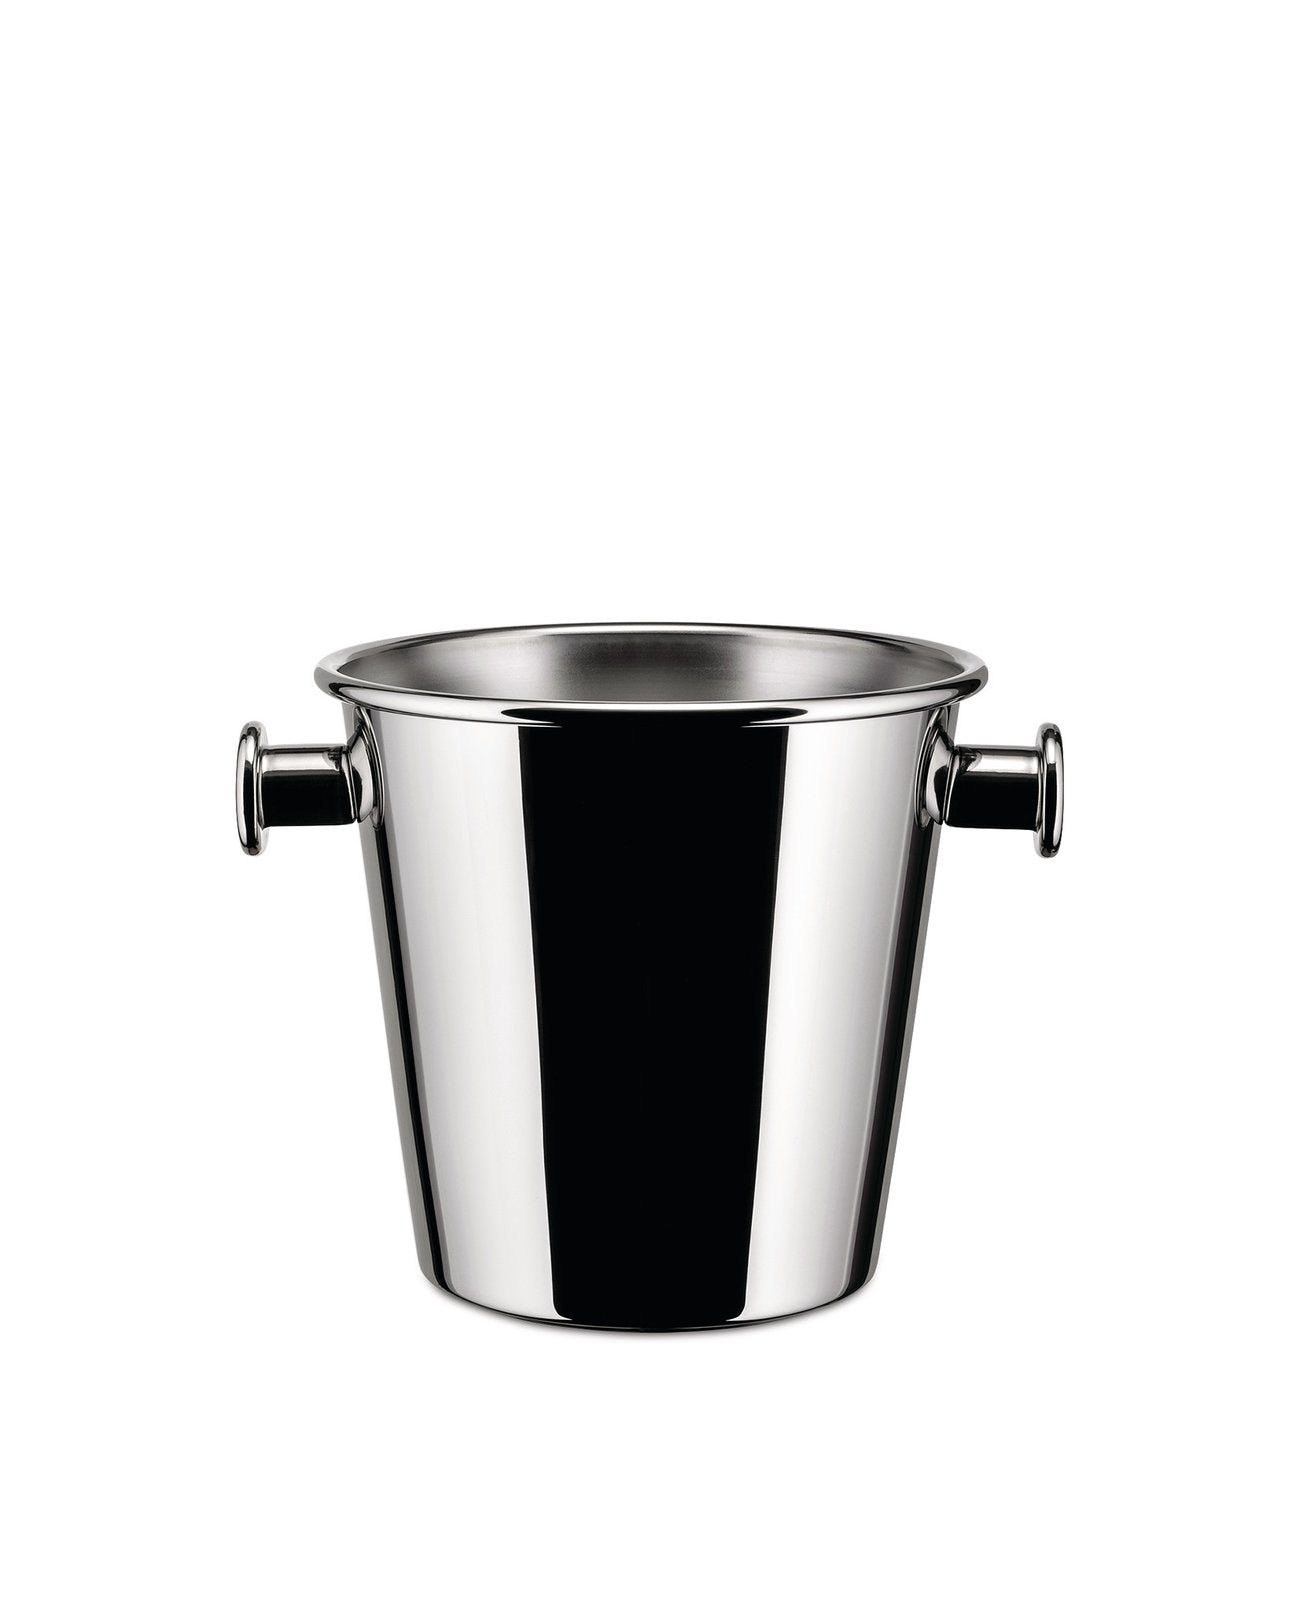 Alessi Ettore Sottsass Stainless Steel Bar Stirrer at FORZIERI